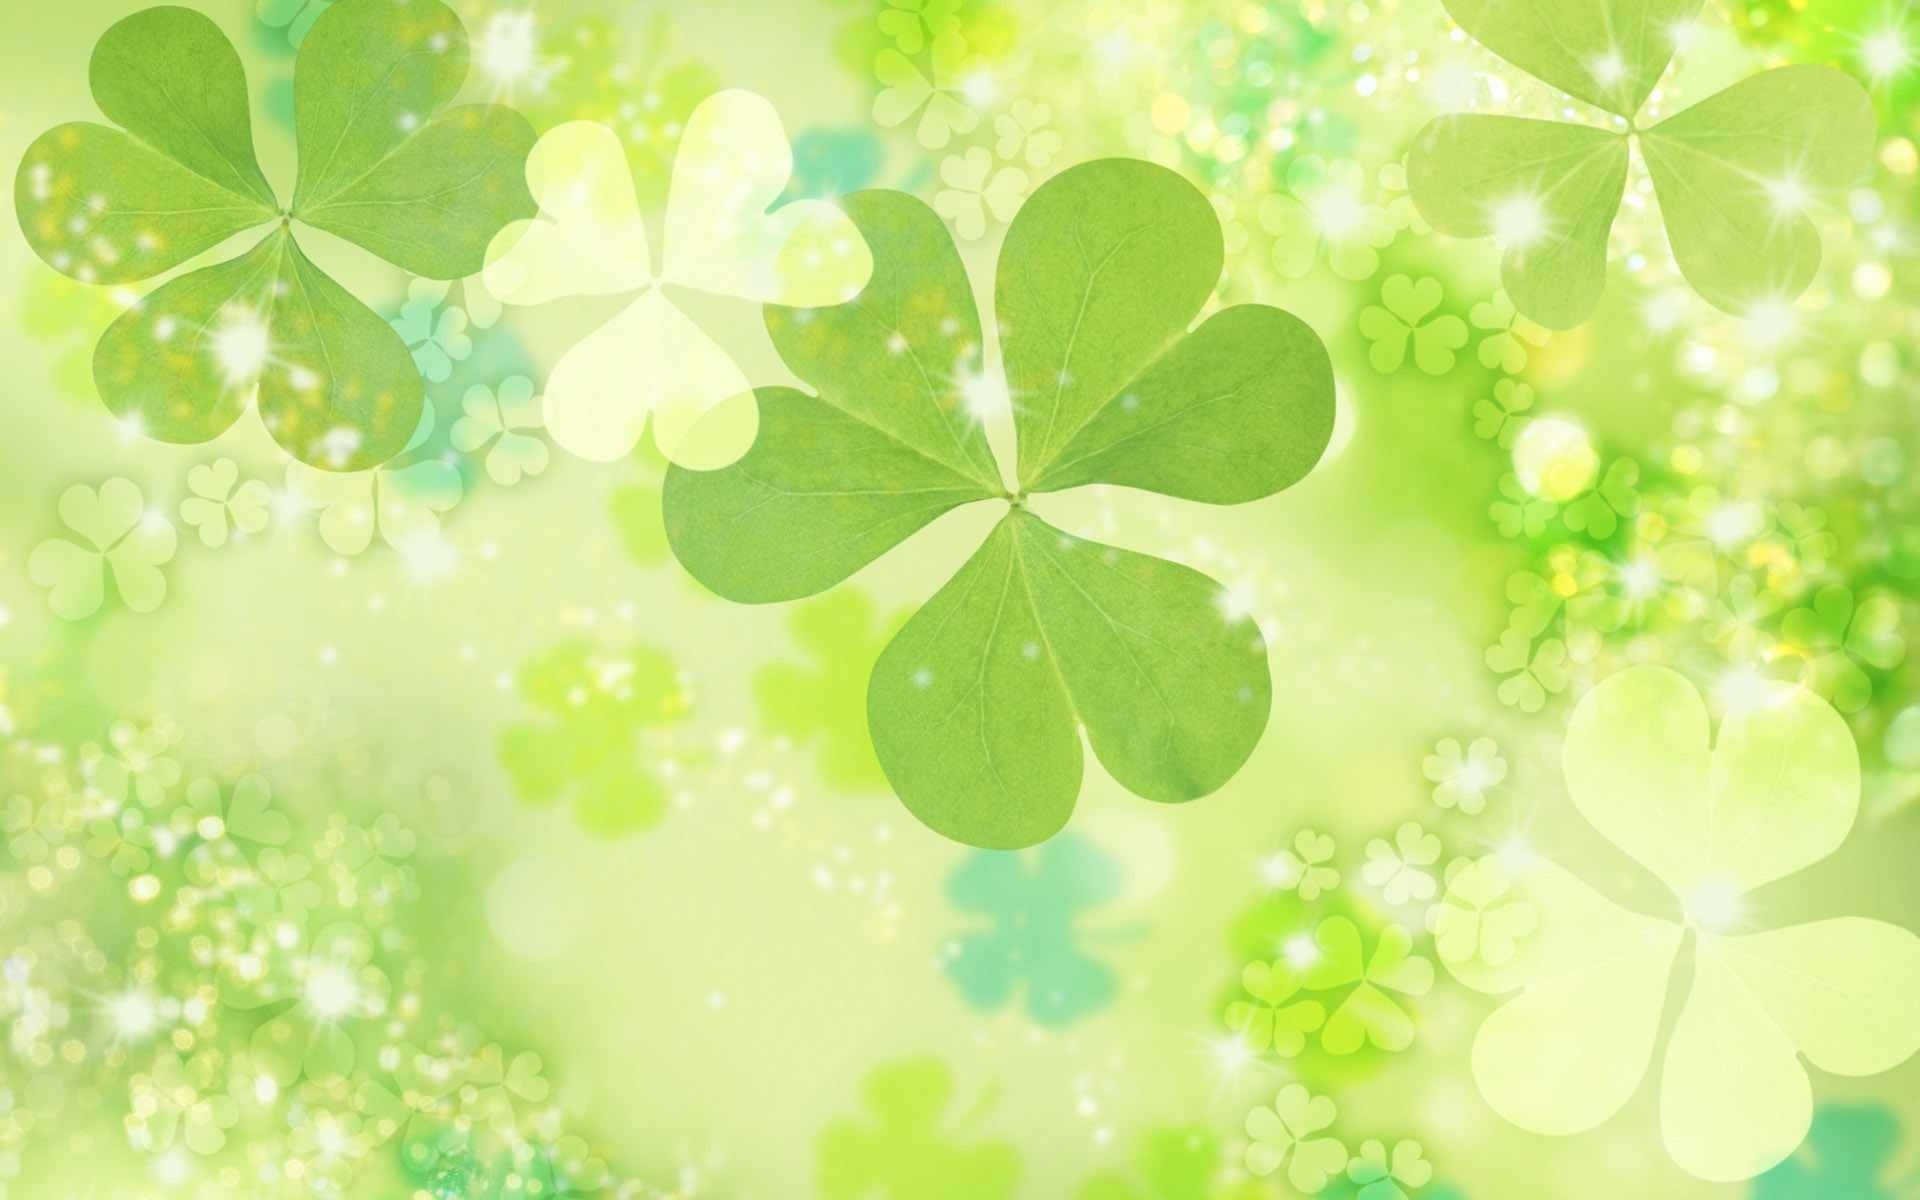 10 Best St Patrick's Day Backgrounds Free FULL HD 1080p For PC Background